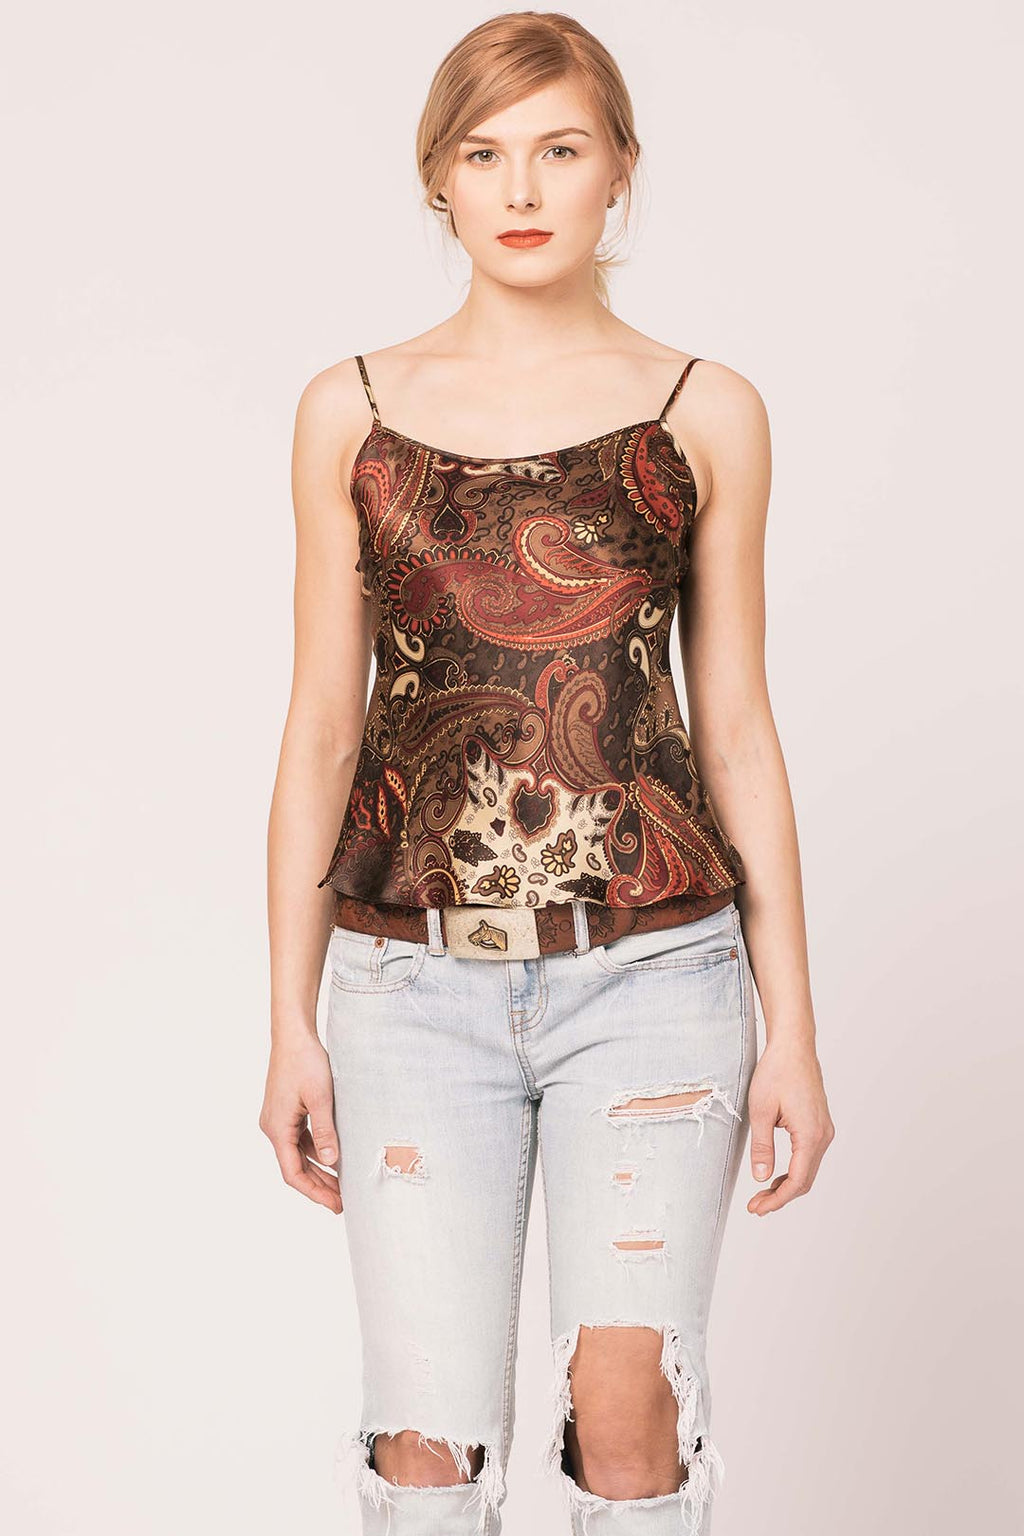 TAYLOR Silk Cami - Red and Sienna Paisley